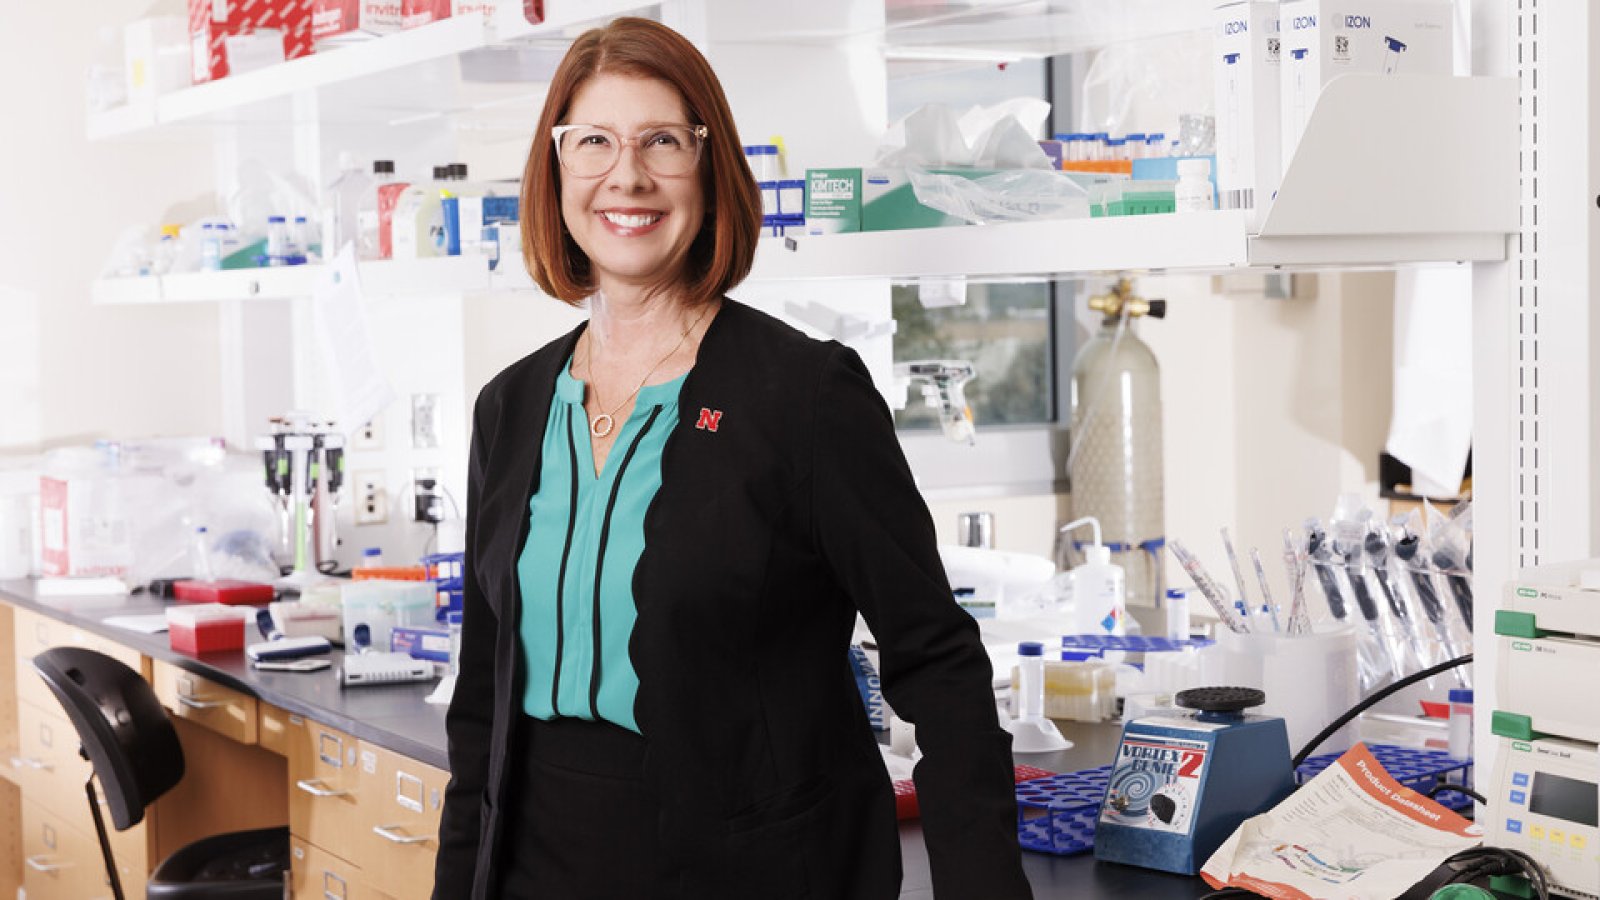 Nebraska's Angela Pannier, Swarts Family Chair of Biological Systems Engineering, delivered the Nebraska Lecture on Nov. 17, laying out the history of her field and both the challenges and promises ahead.